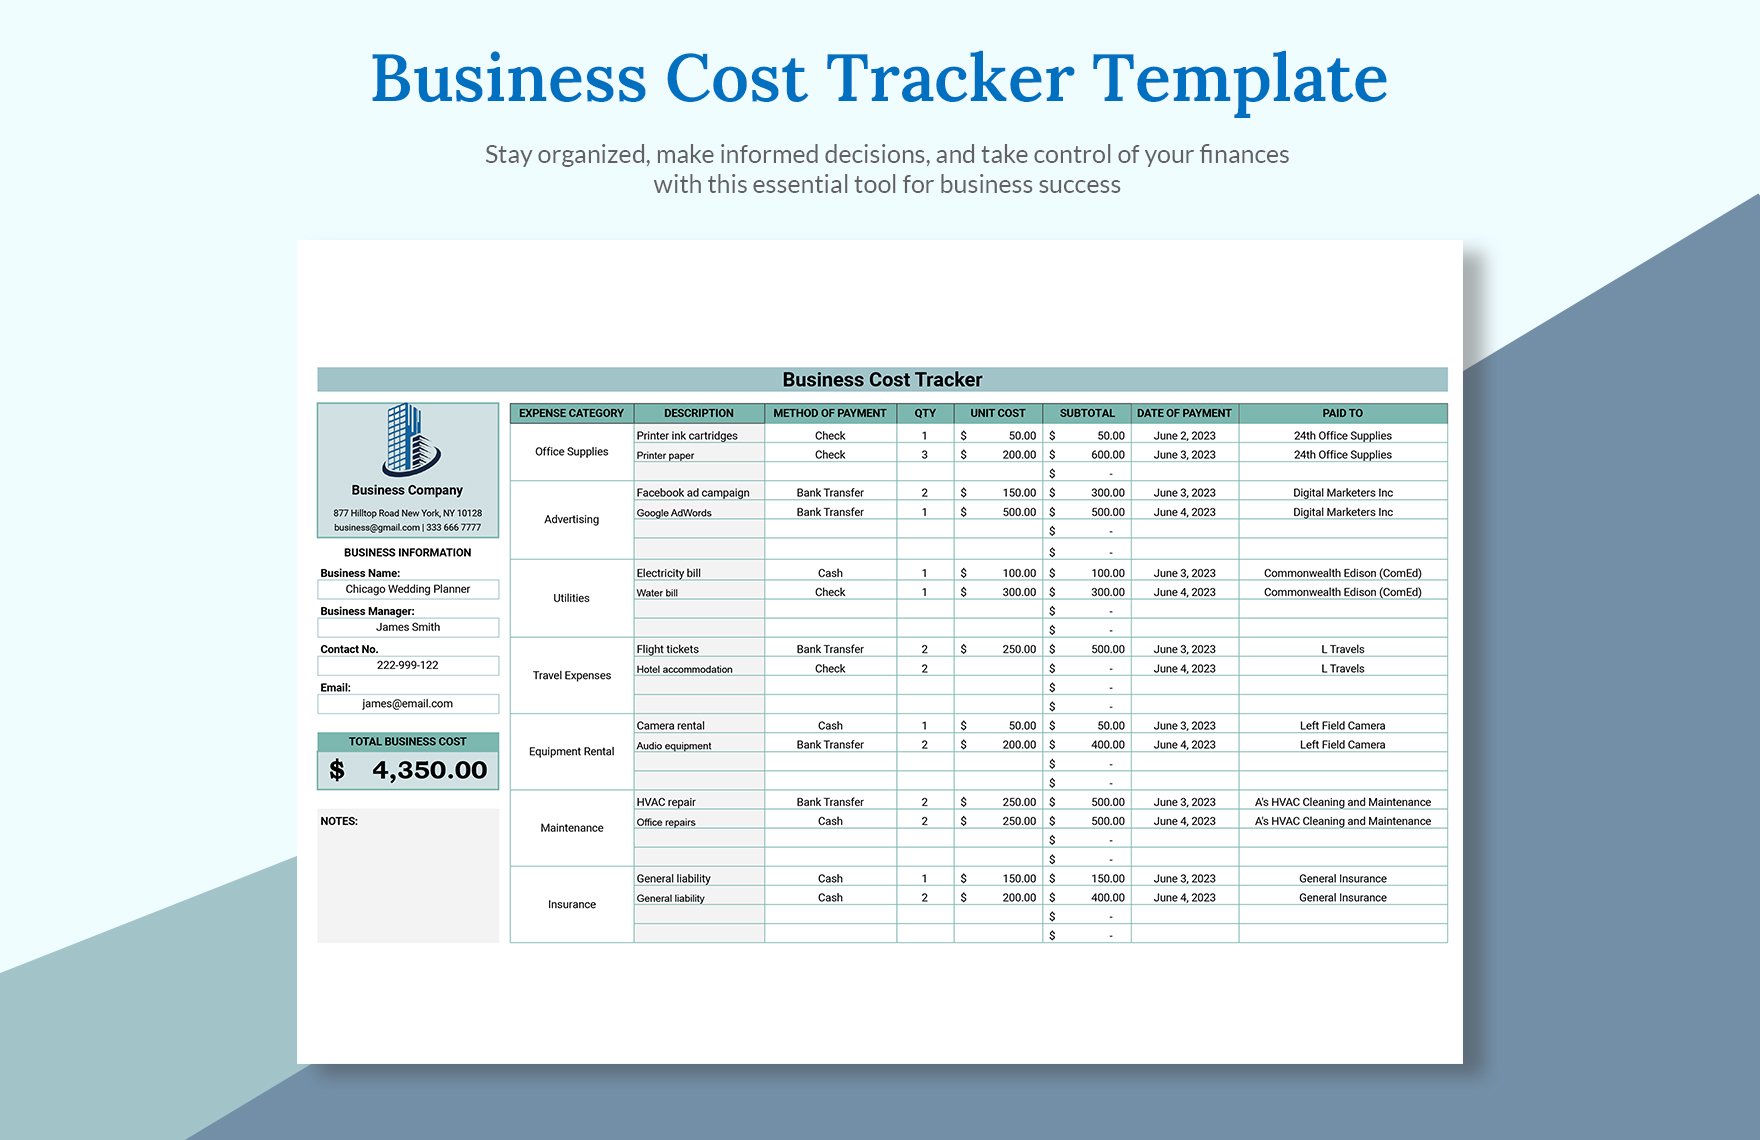 Business Cost Tracker Template